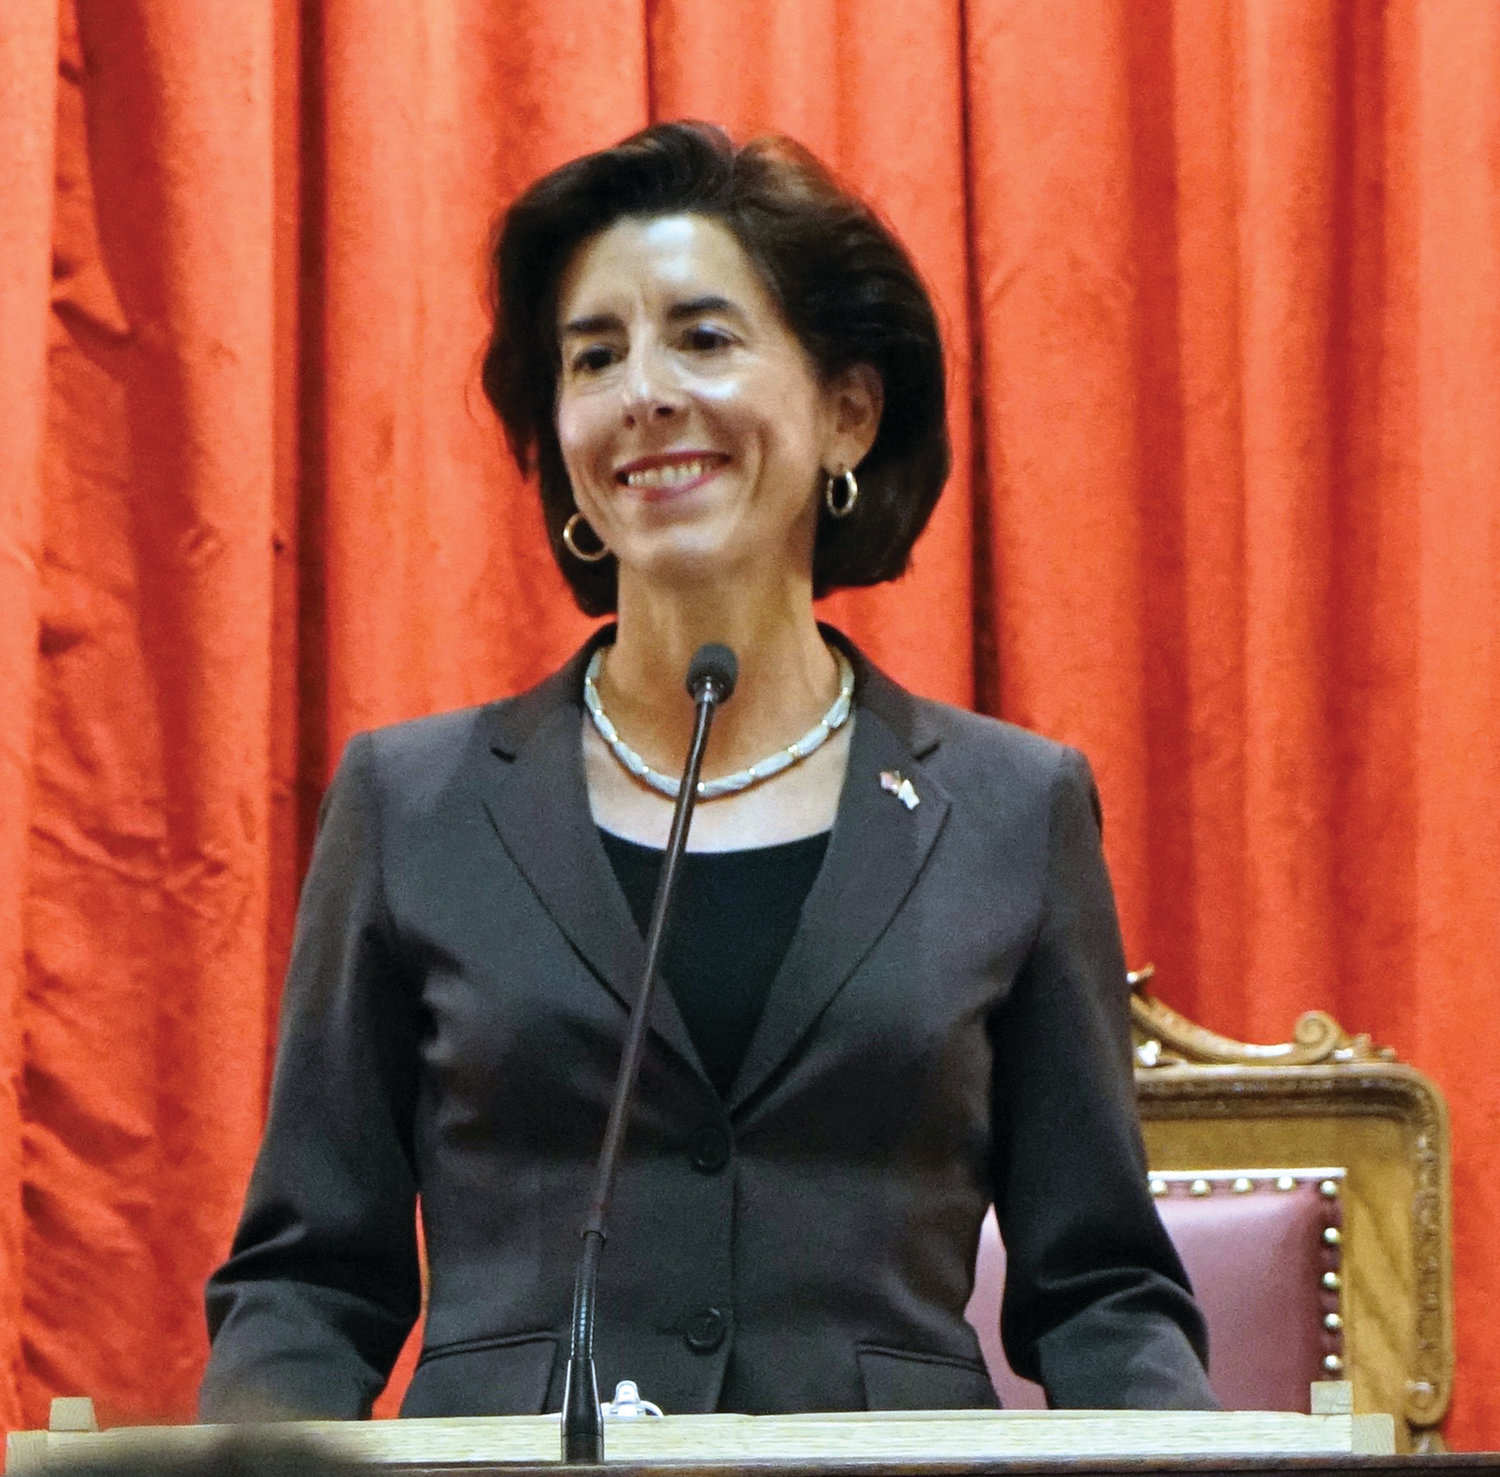 FOCUSED ON ‘BIGGEST CHALLENGES’: Gov. Gina Raimondo delivers her sixth State of the State address in the House chamber at the State House on Tuesday night.